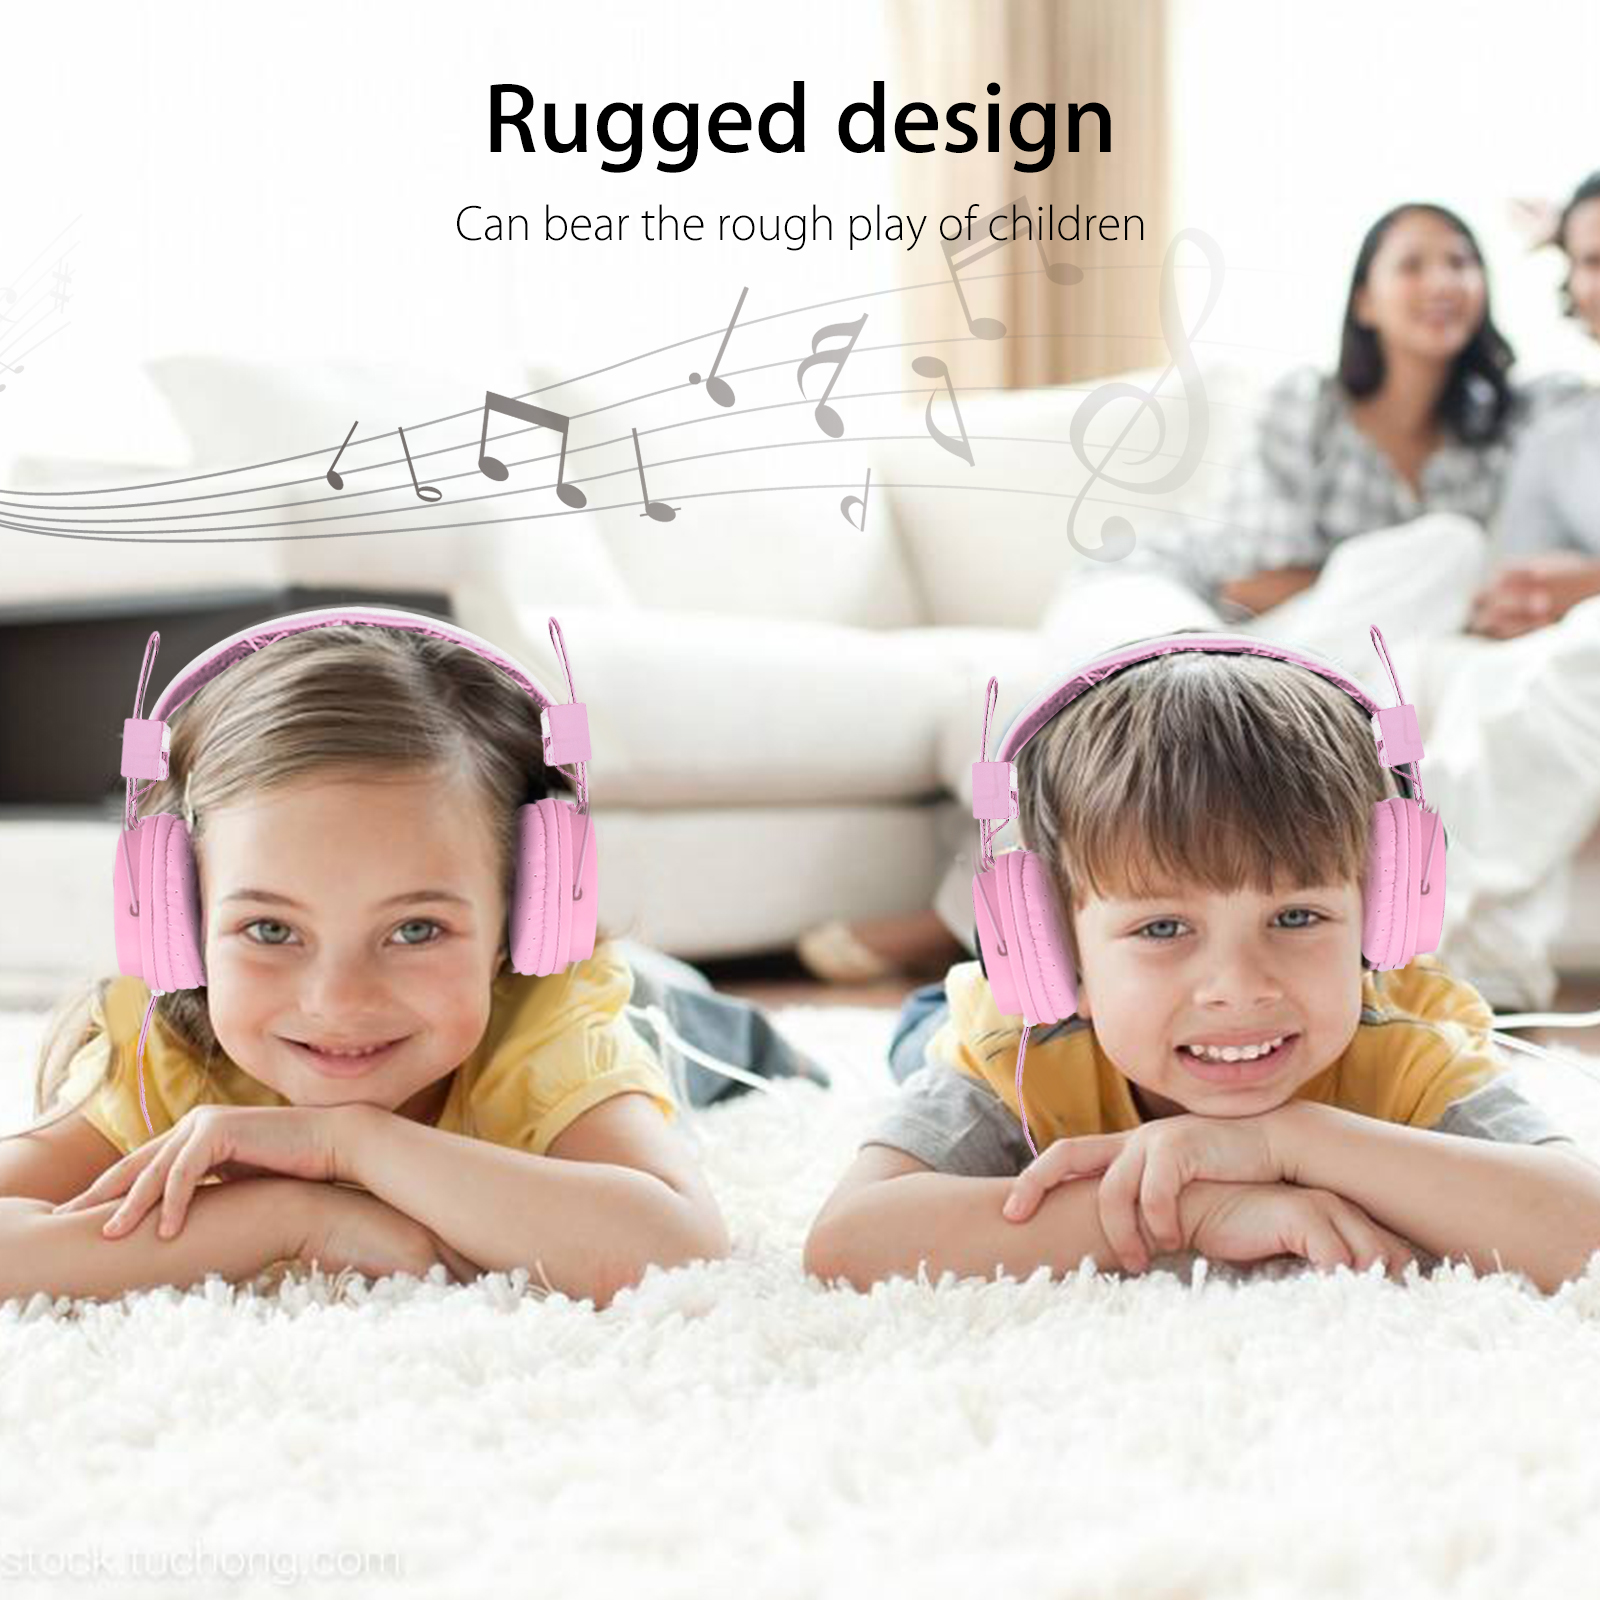 Foldable Noise Reduction Headphones for Android